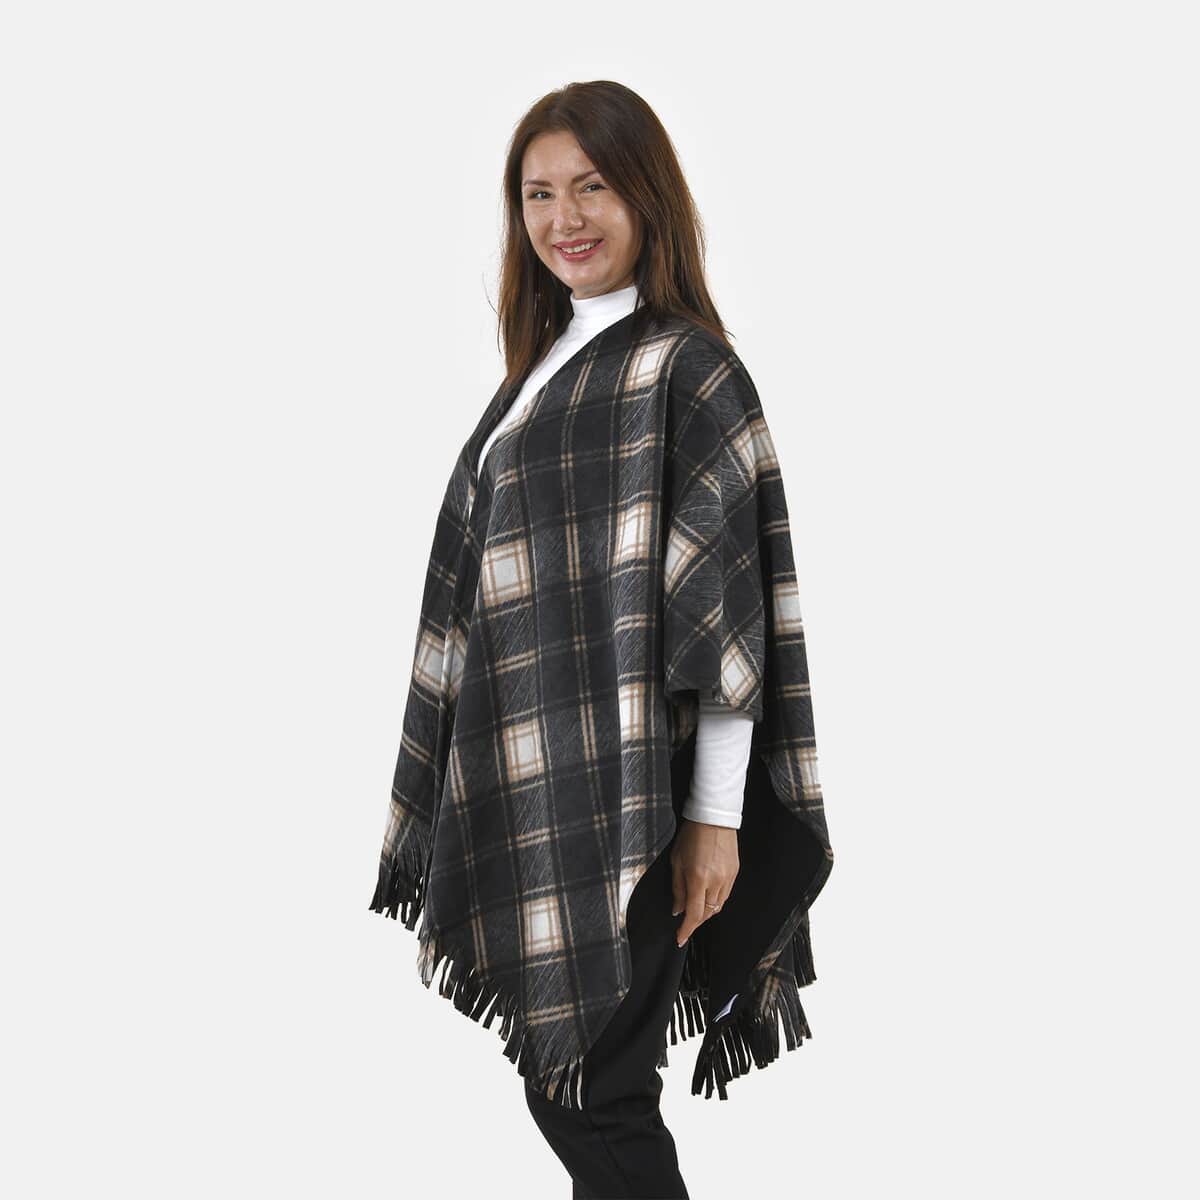 TAMSY Large Neutral Plaid Pattern Double Knit Poncho with Fringe (48"X 28.3") image number 2